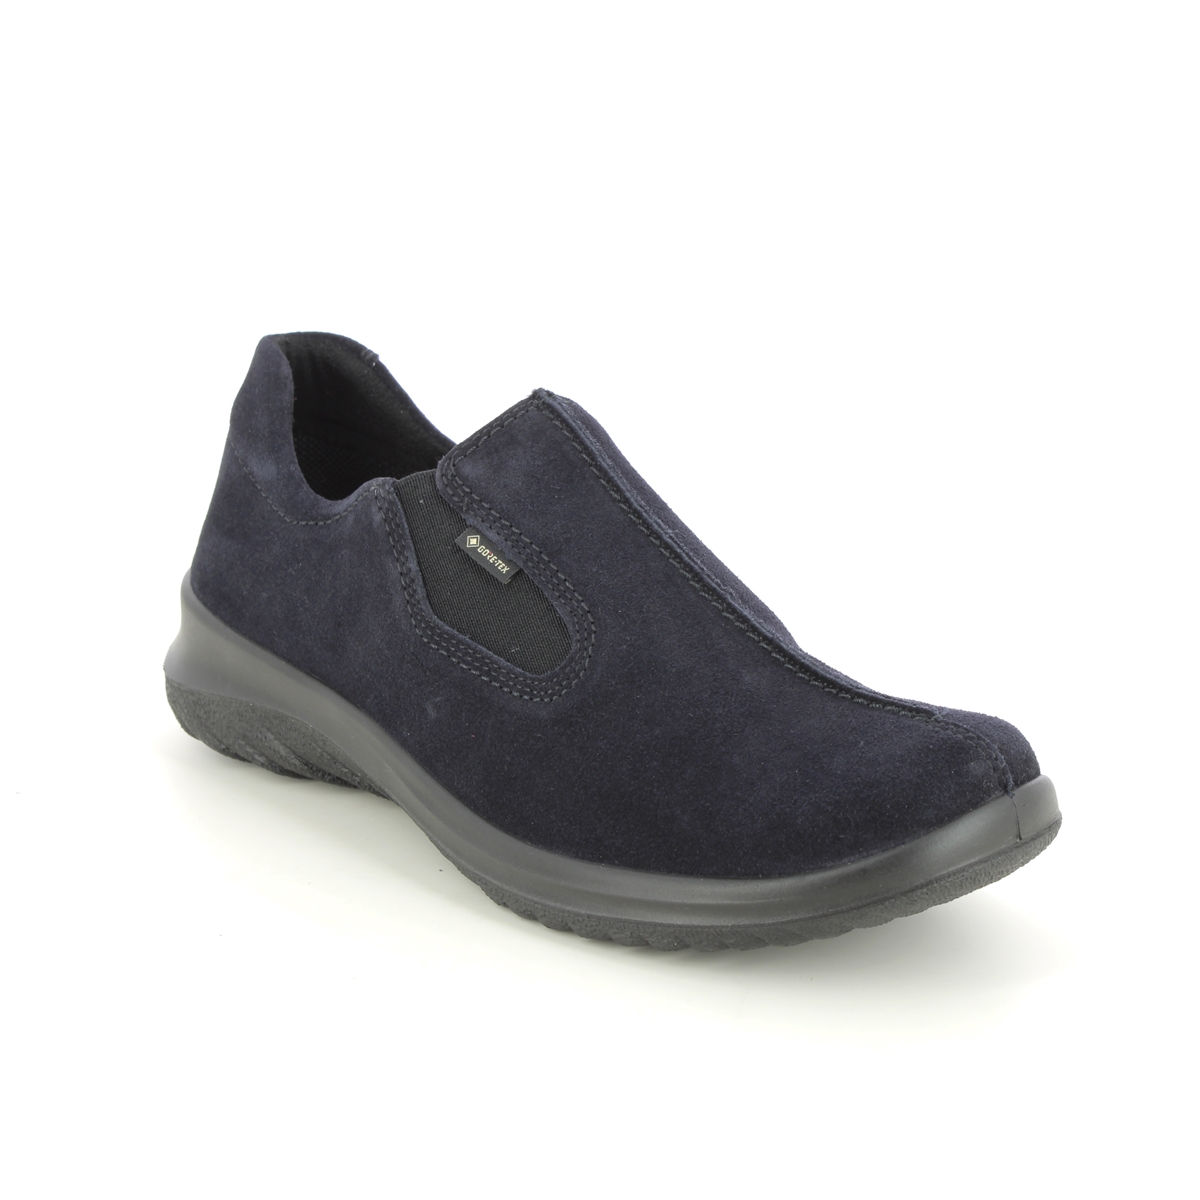 Legero Soft Shoe Gtx Navy Suede Womens Comfort Slip On Shoes 09568-80 In Size 3.5 In Plain Navy Suede